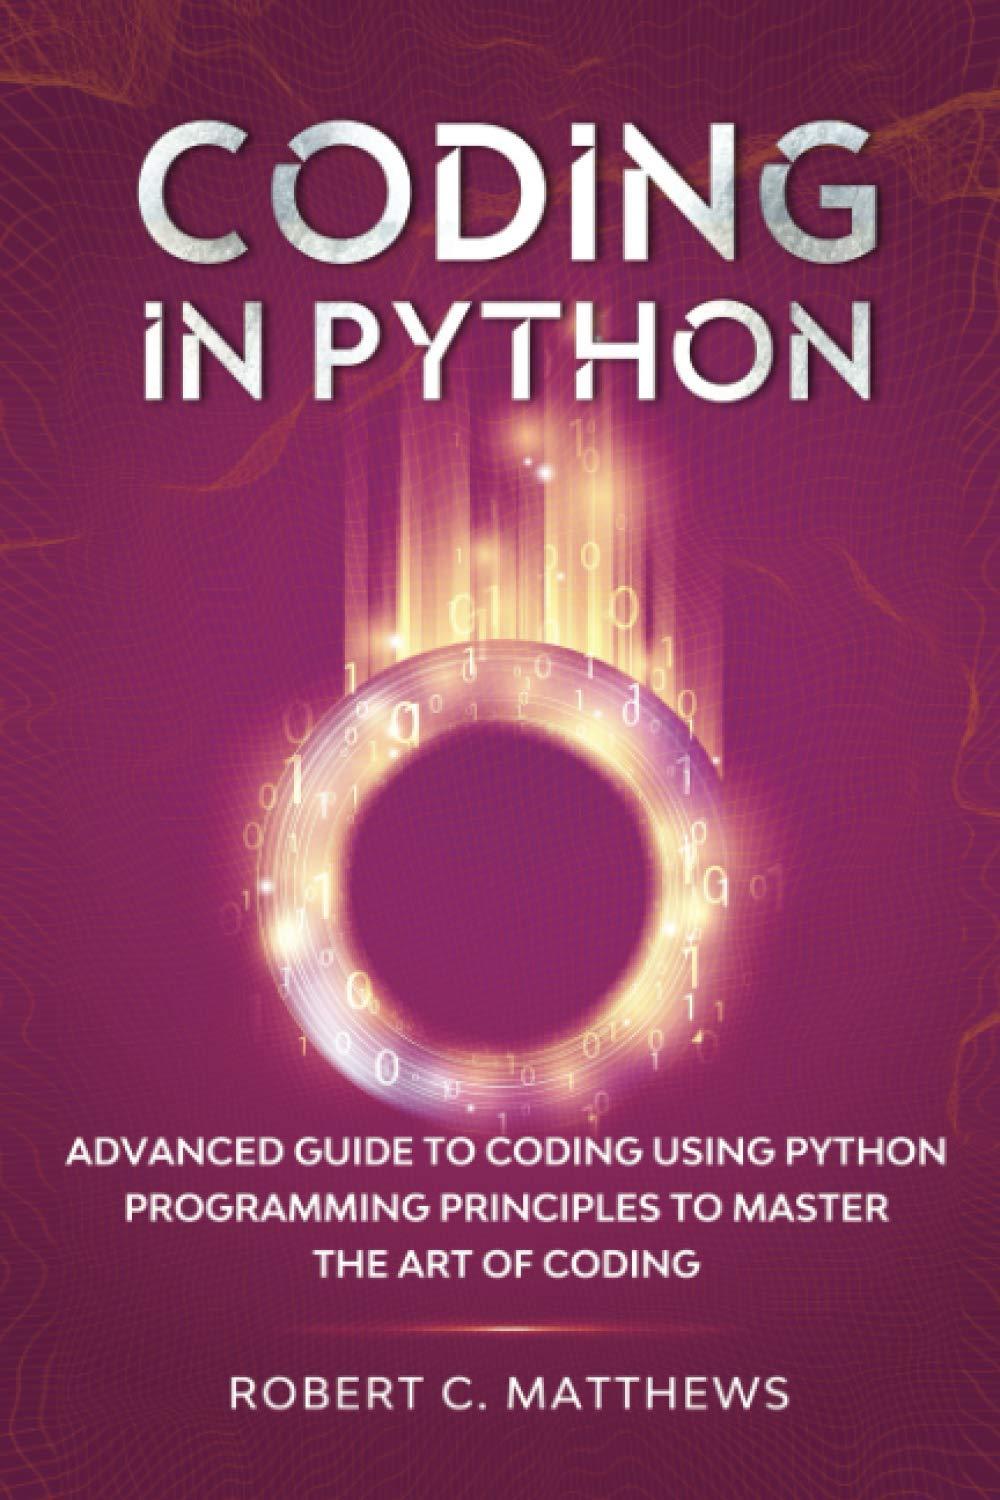 Coding In Python Advanced Guide To Coding Using Python Programming Principles To Master The Art Of Coding